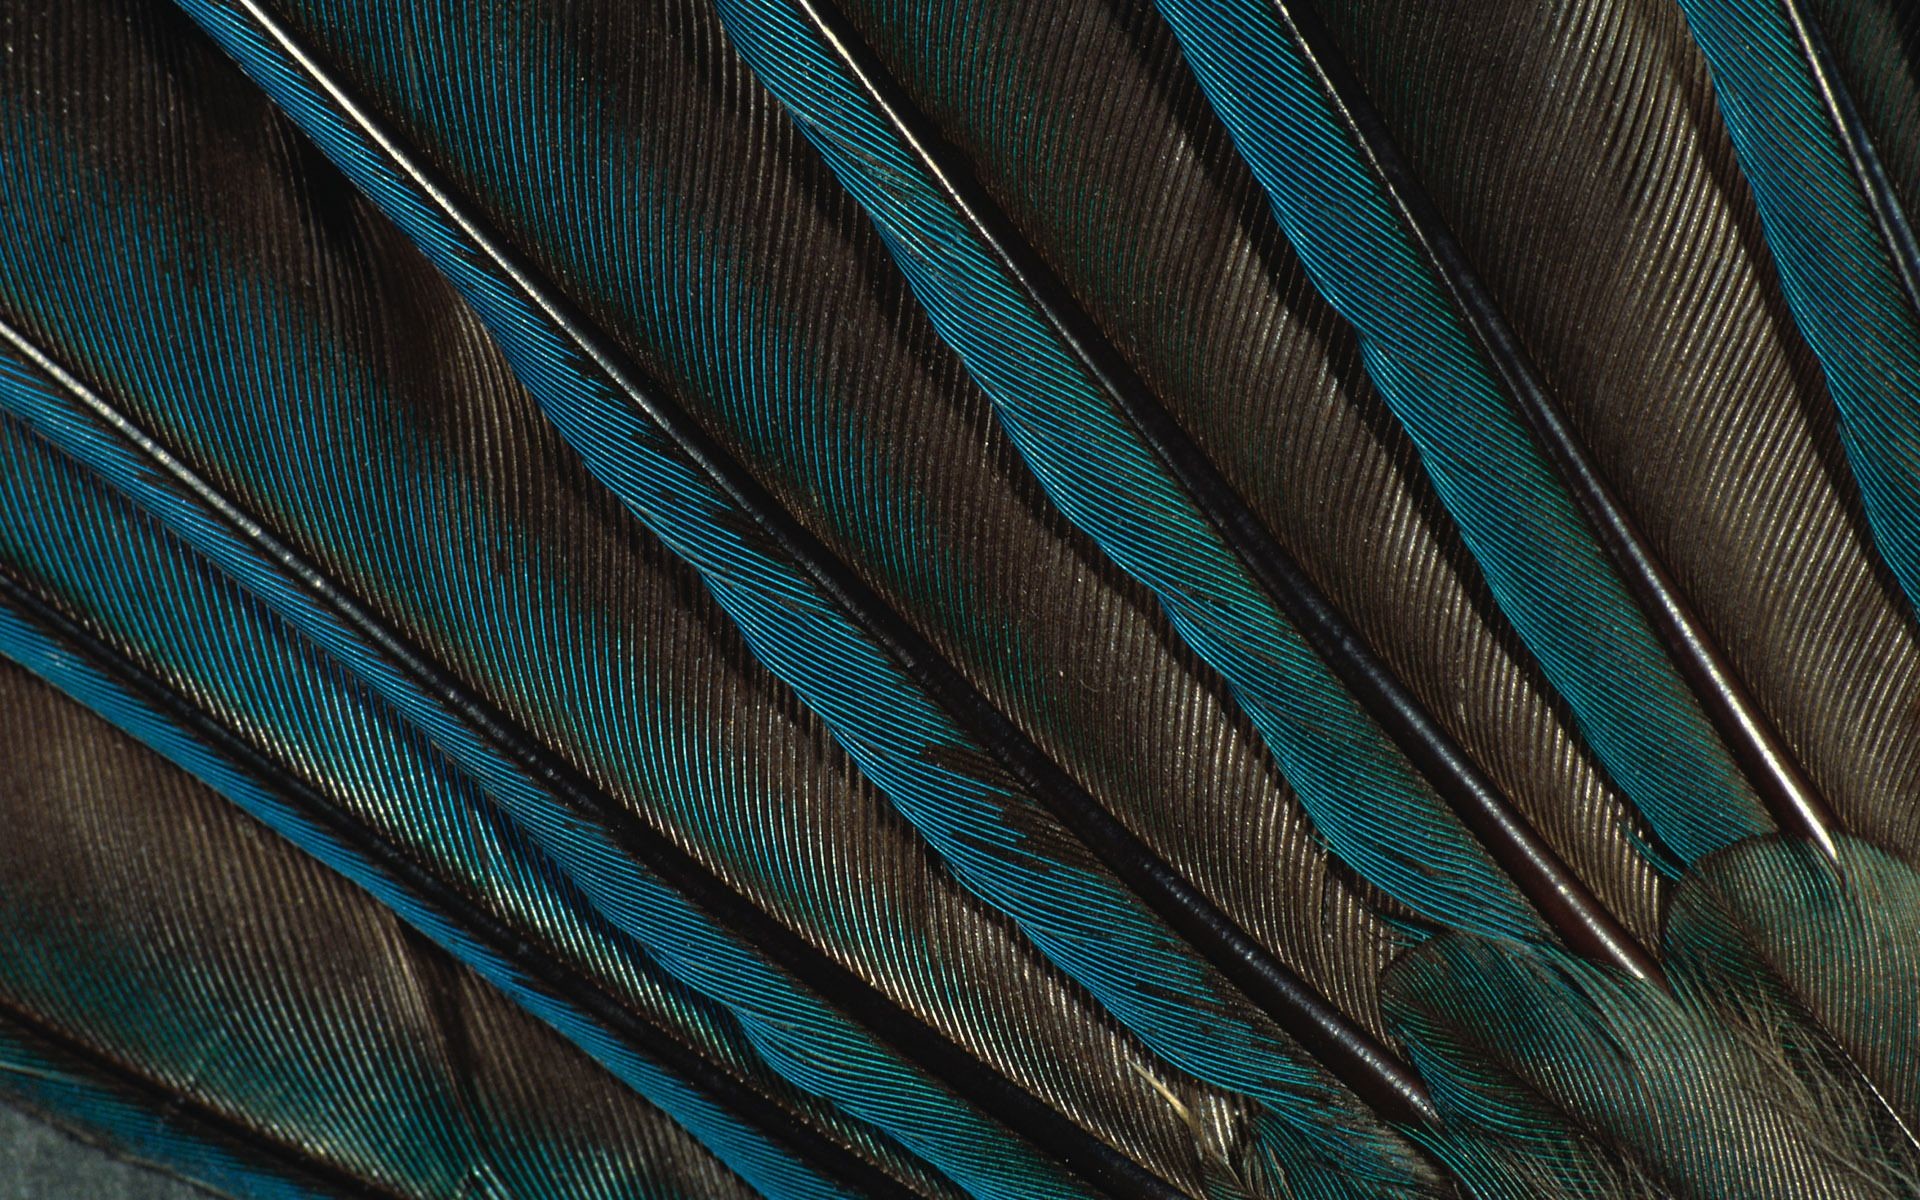 1920x1200 feather texture wallpaper - Google Search